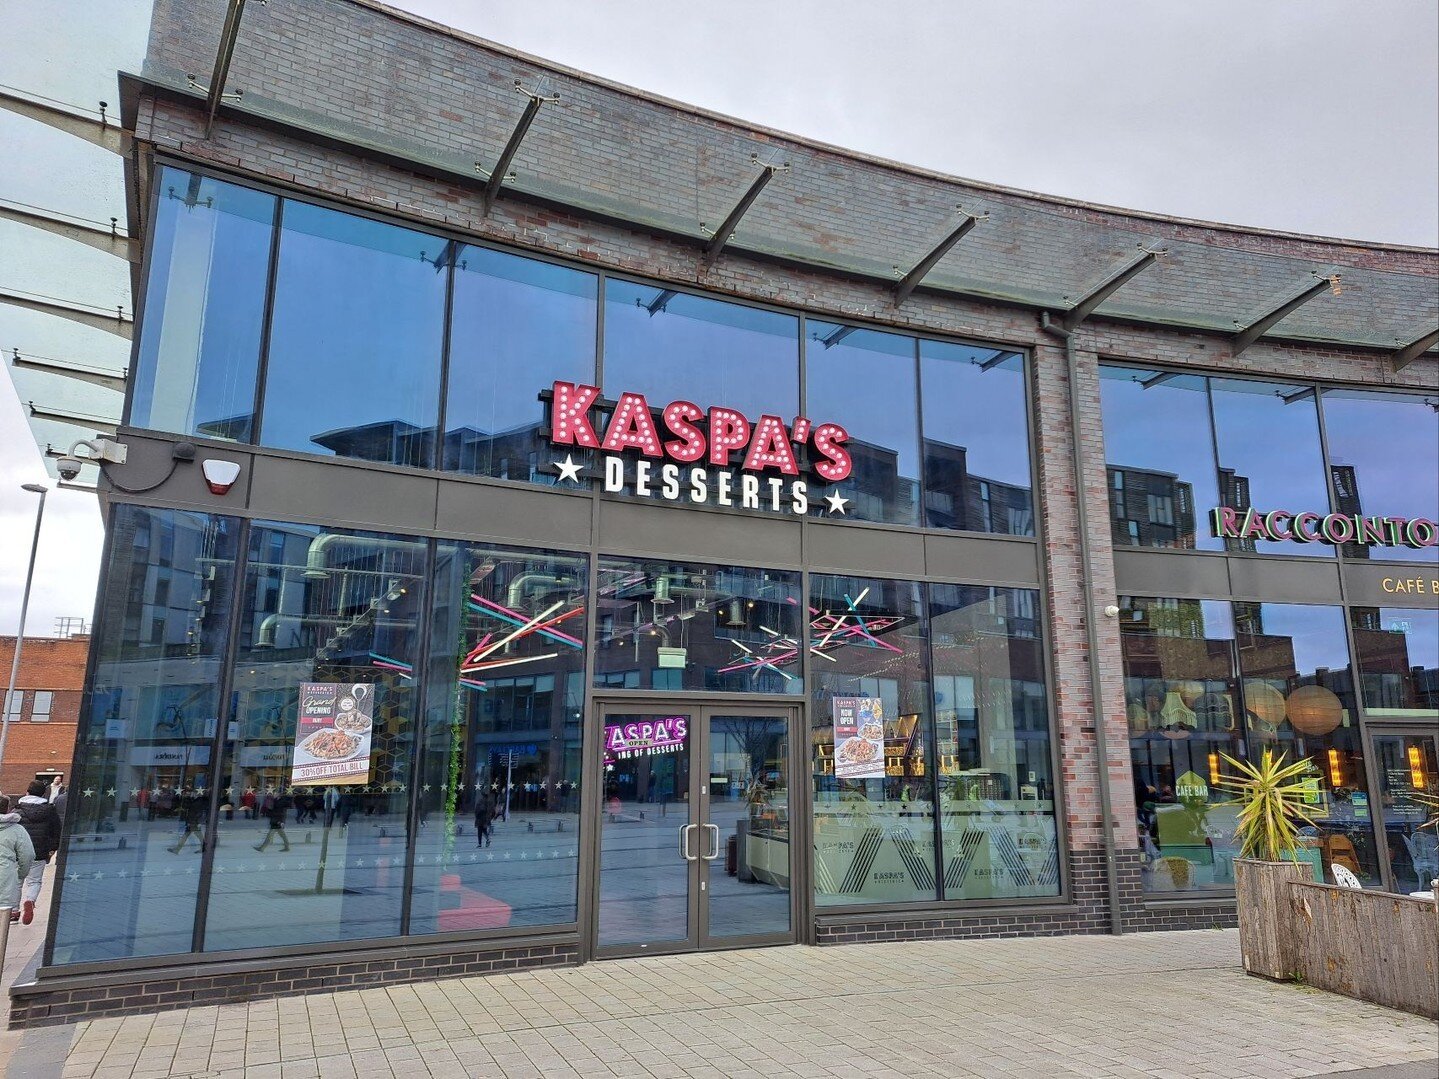 Our latest design for #Kaspas has opened in Bury, Greater Manchester!